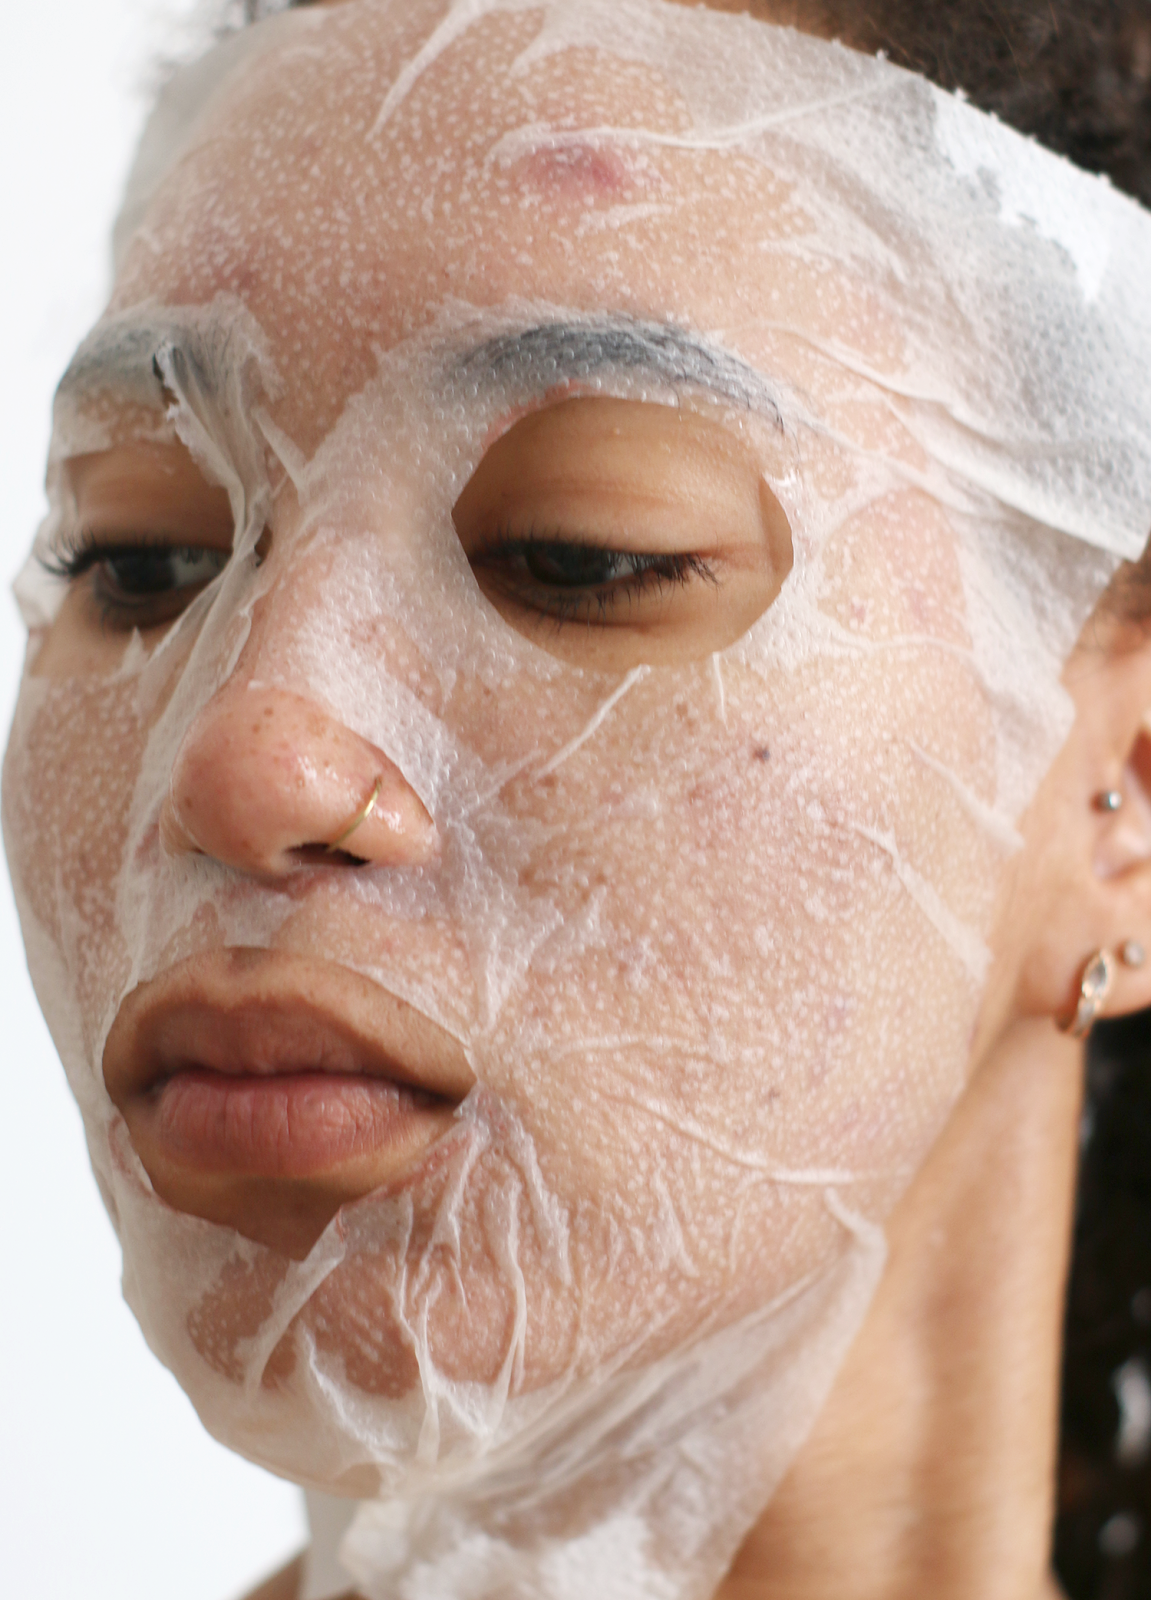 DIY Peel-off mask for blackheads and acne